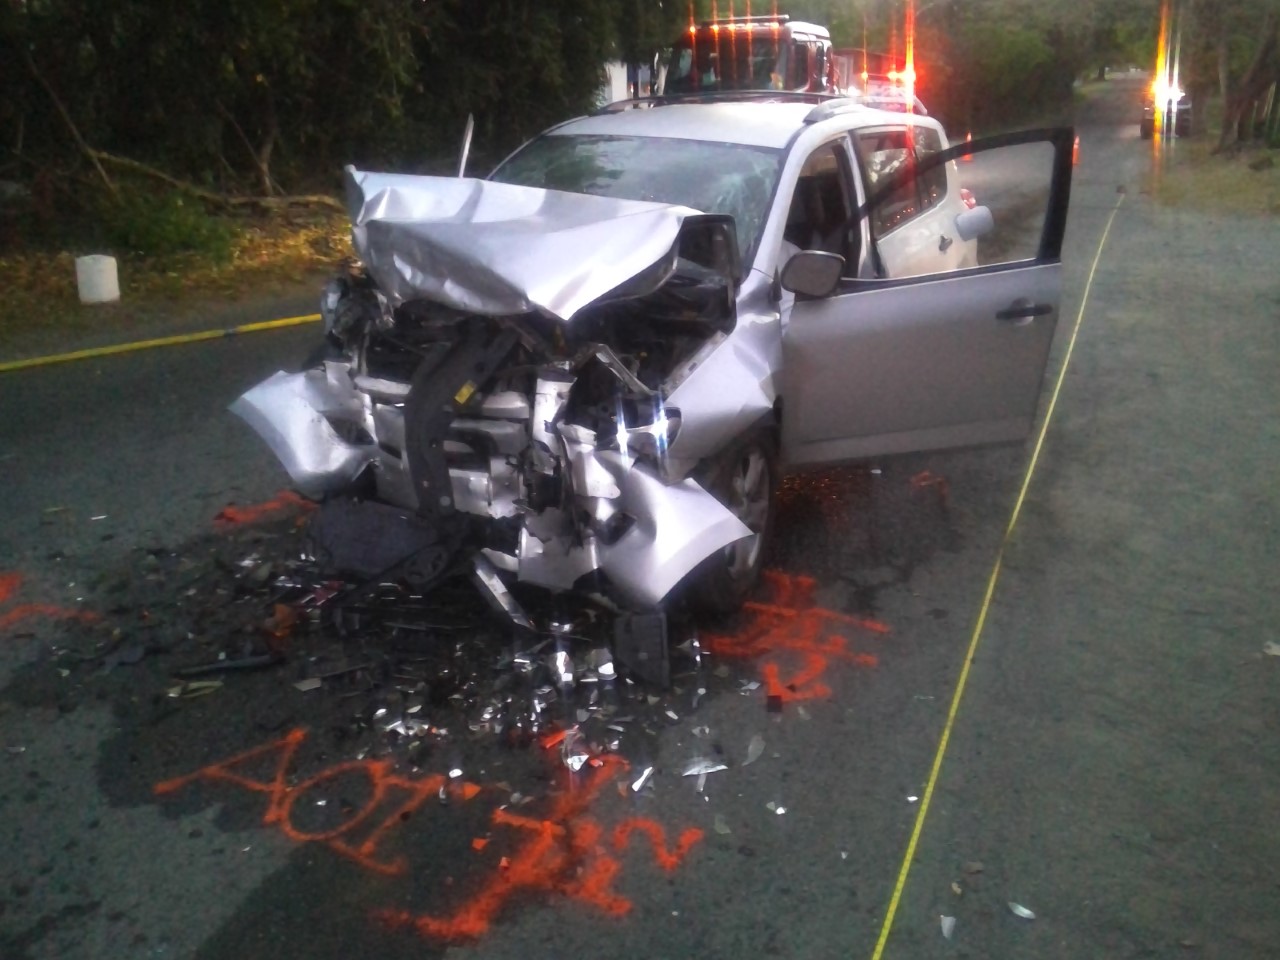 One of the vehicles involved in a head-on collision Sunday on Northside Road on St. Croix. (VIPD photo)